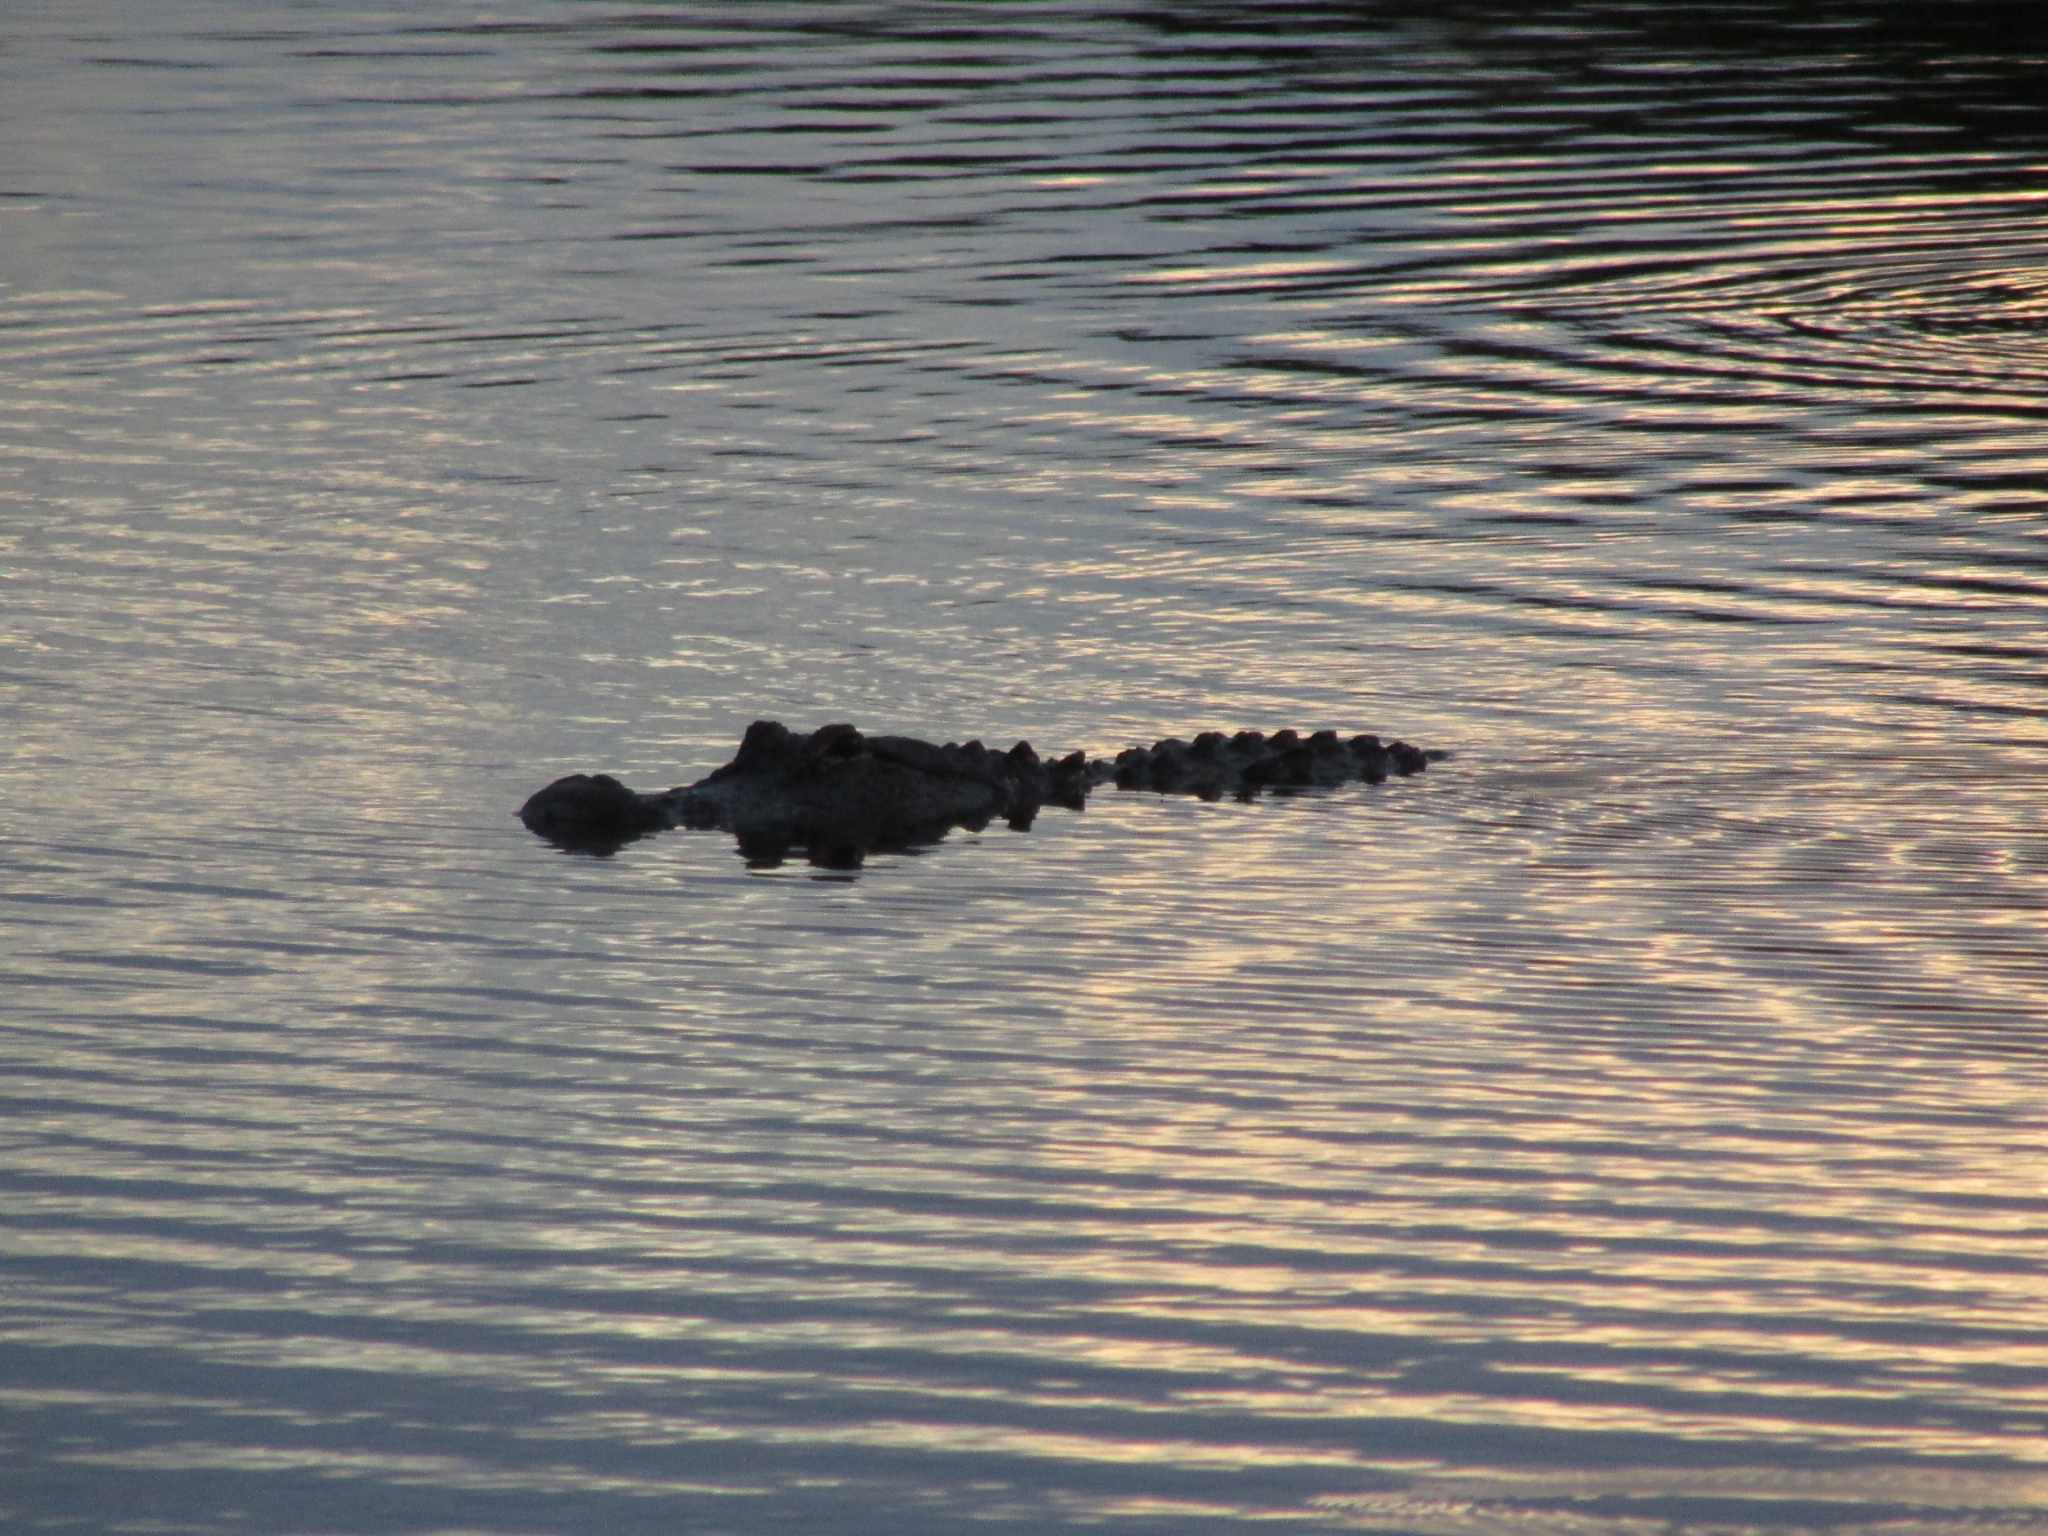 This photograph displays an alligator peaking it's upper body out of the rippling water.